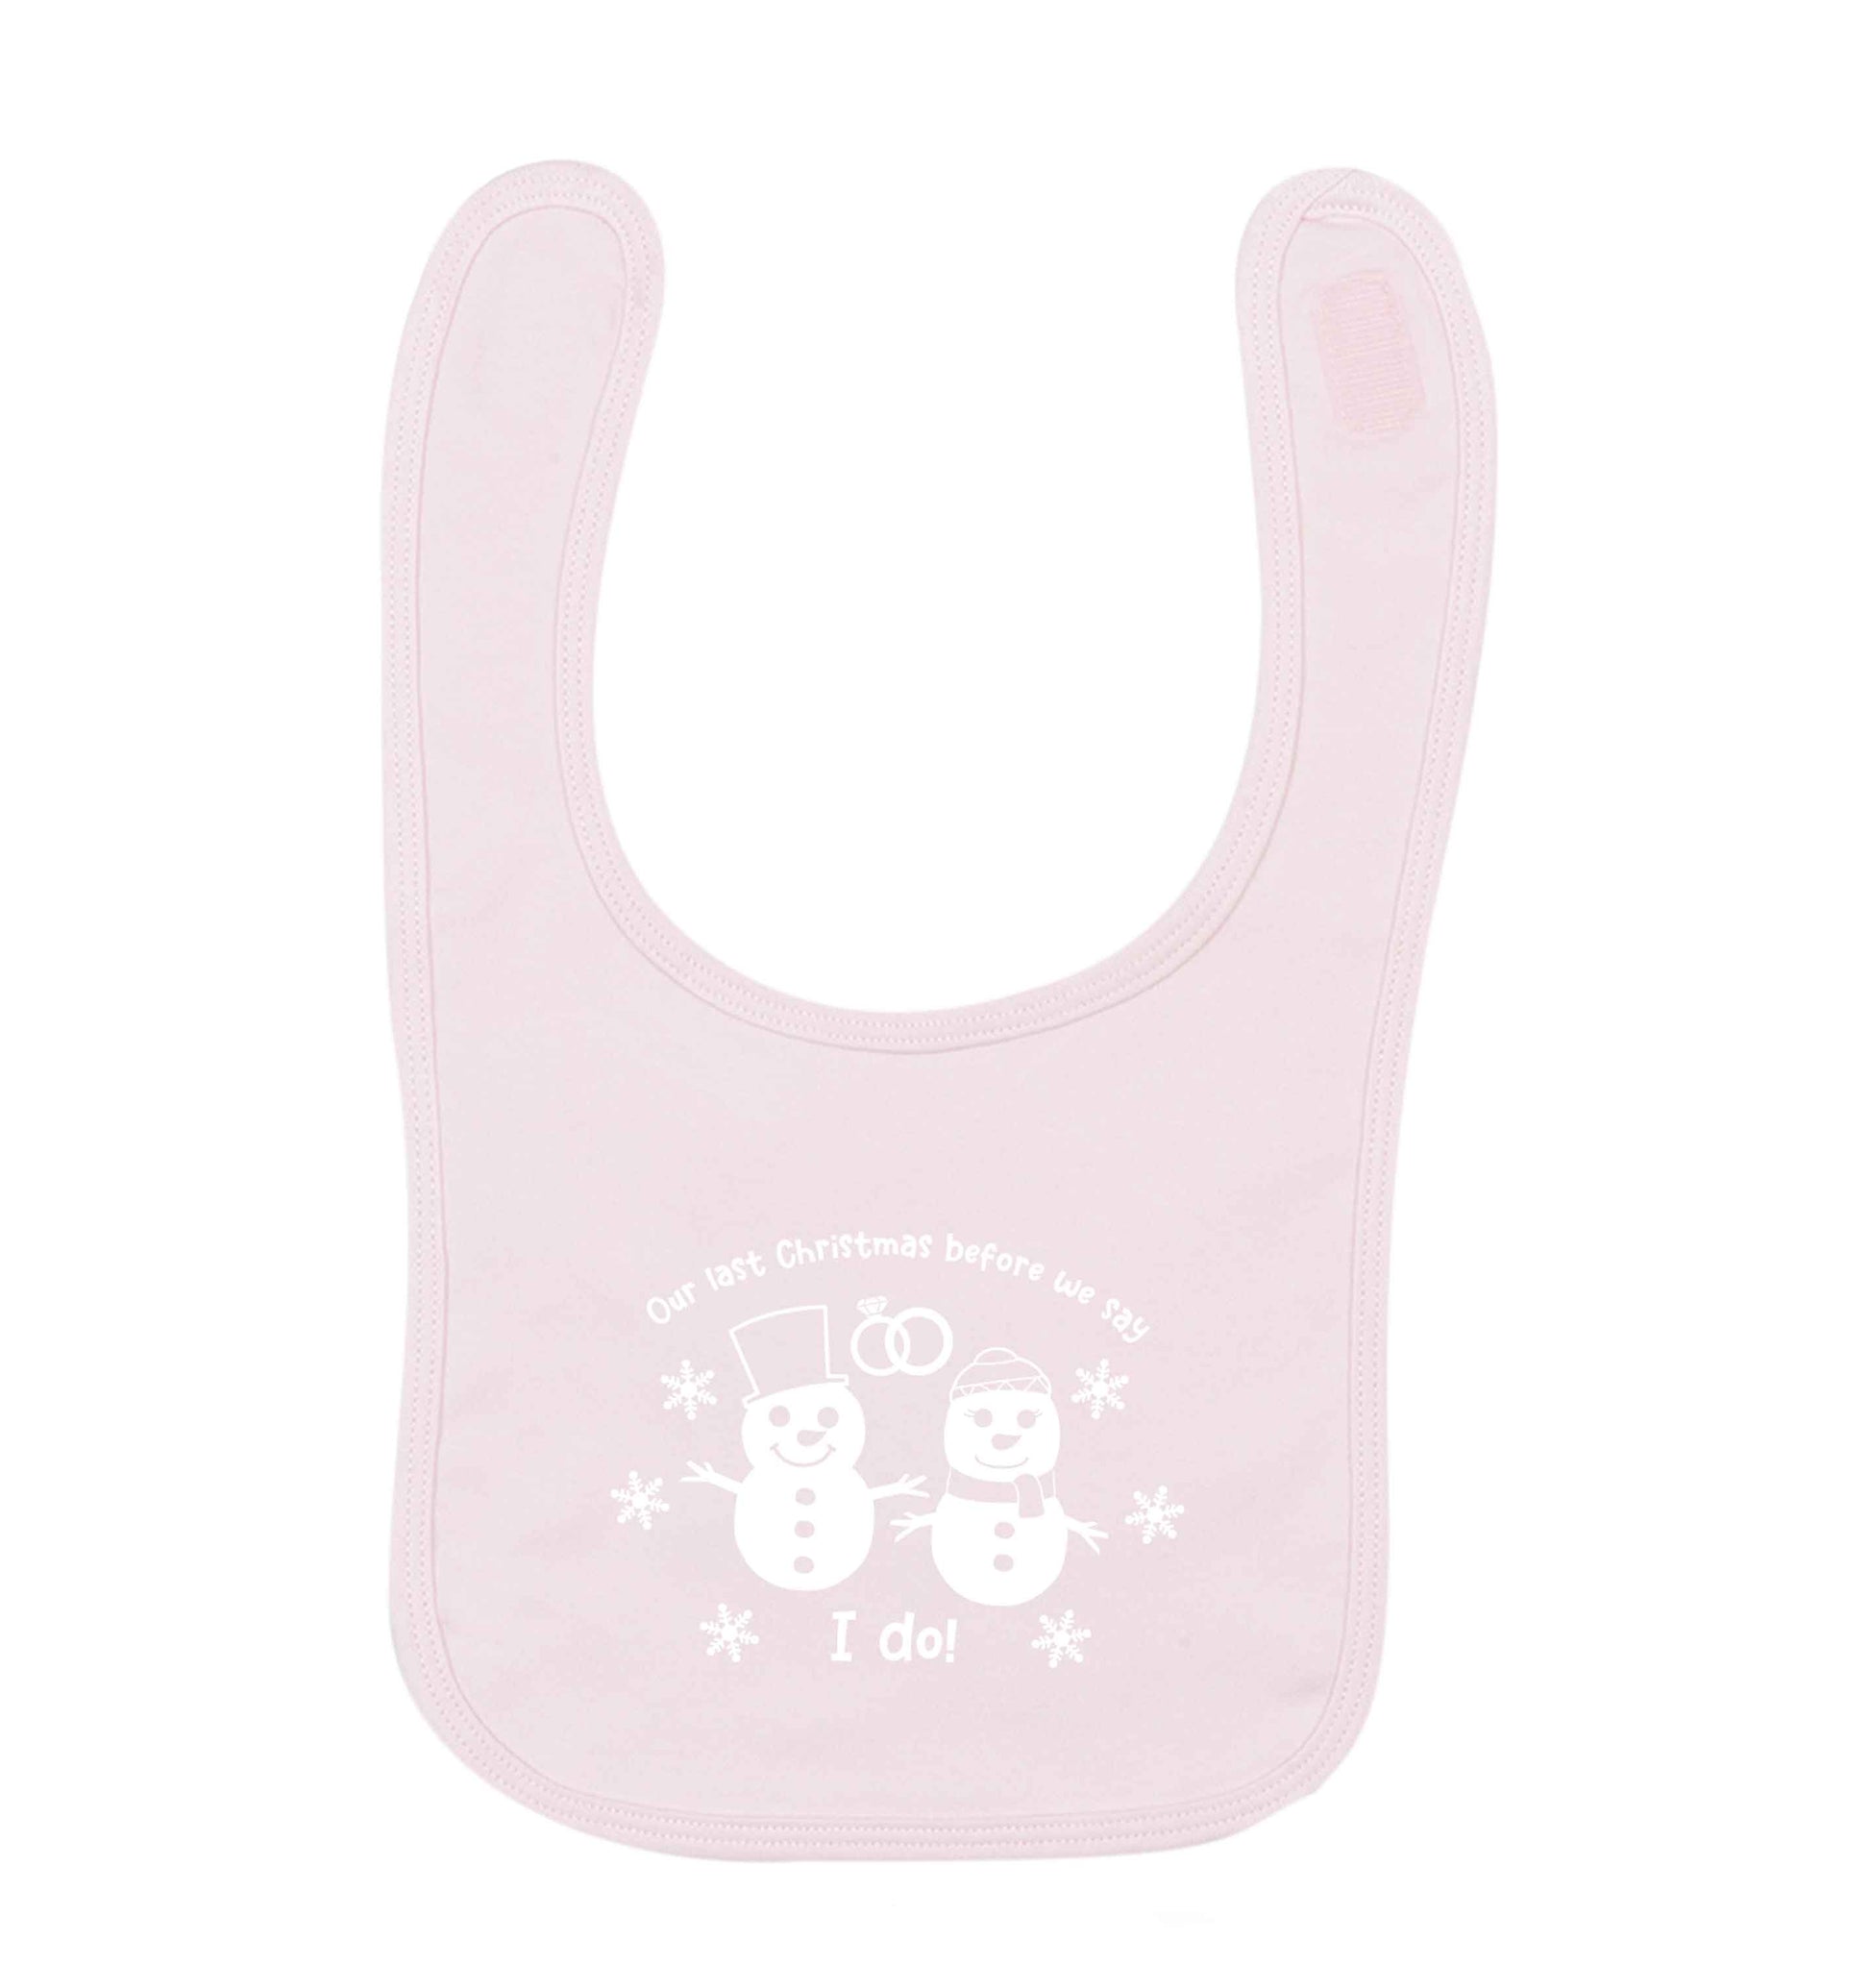 Last Christmas before we say I do pale pink baby bib